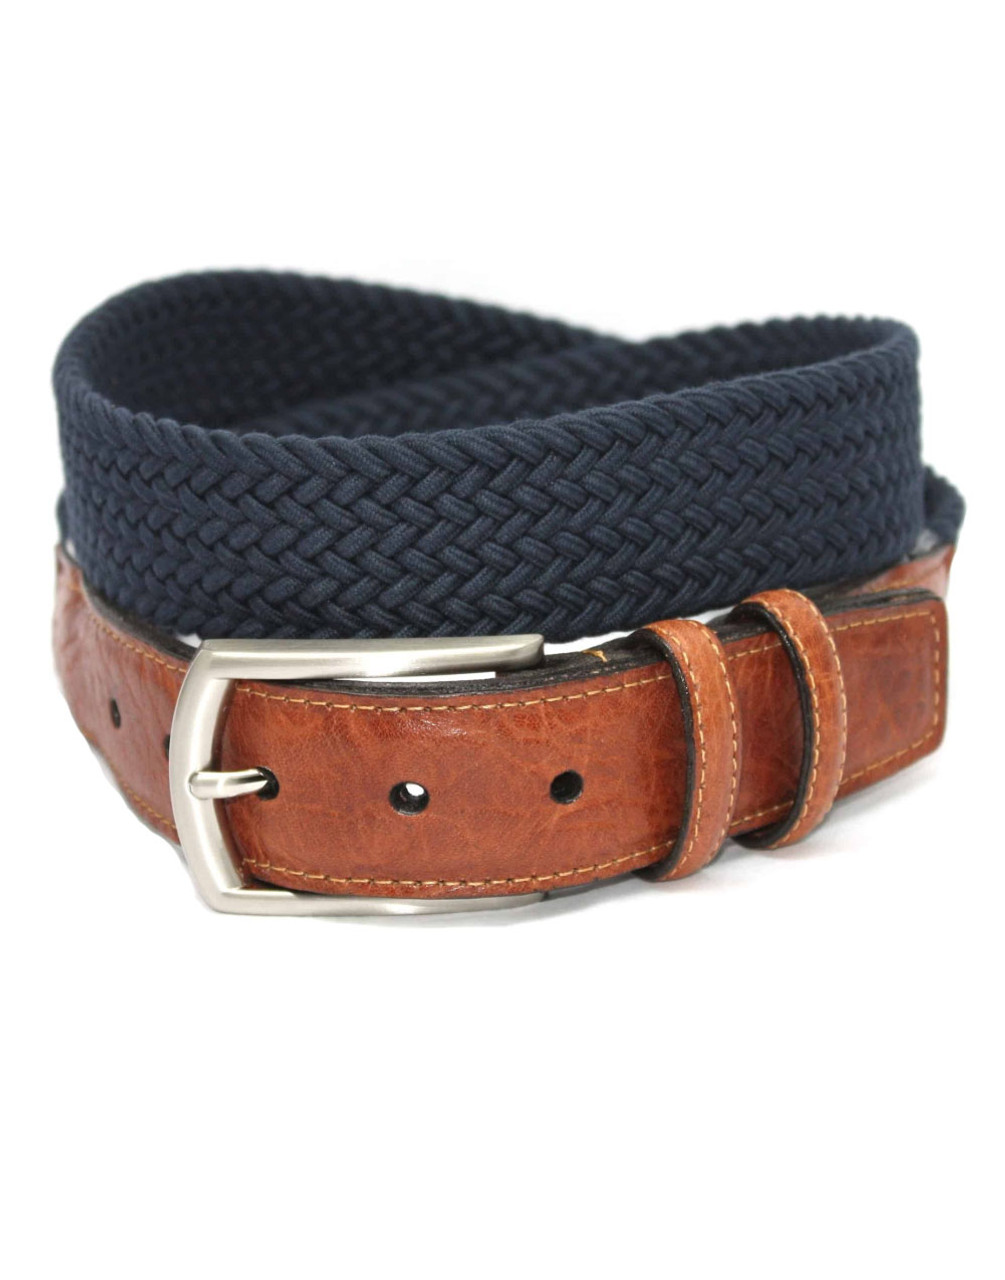 Italian Braided Leather Two Tone Casual Belt in Navy & Brown